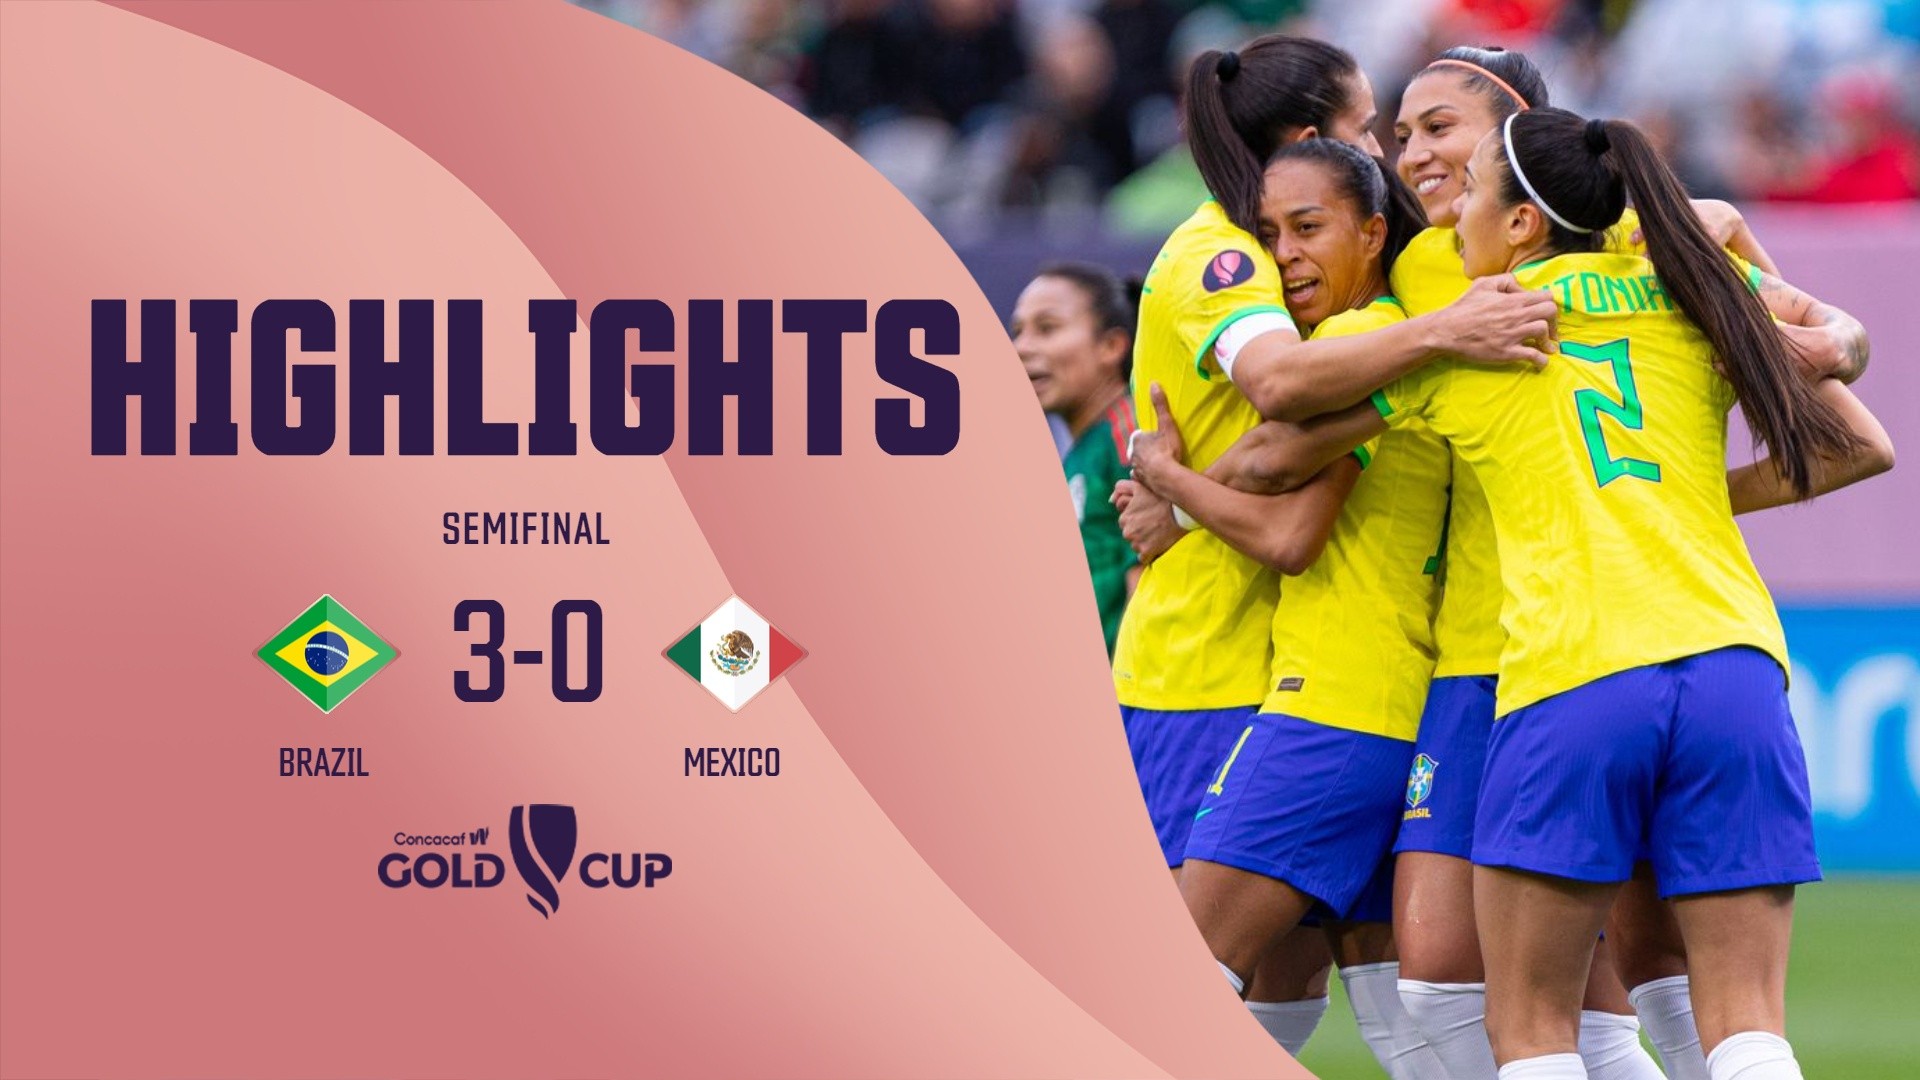 Catch the best moments of the Semifinal match between Brazil and Mexico 🙌▶️